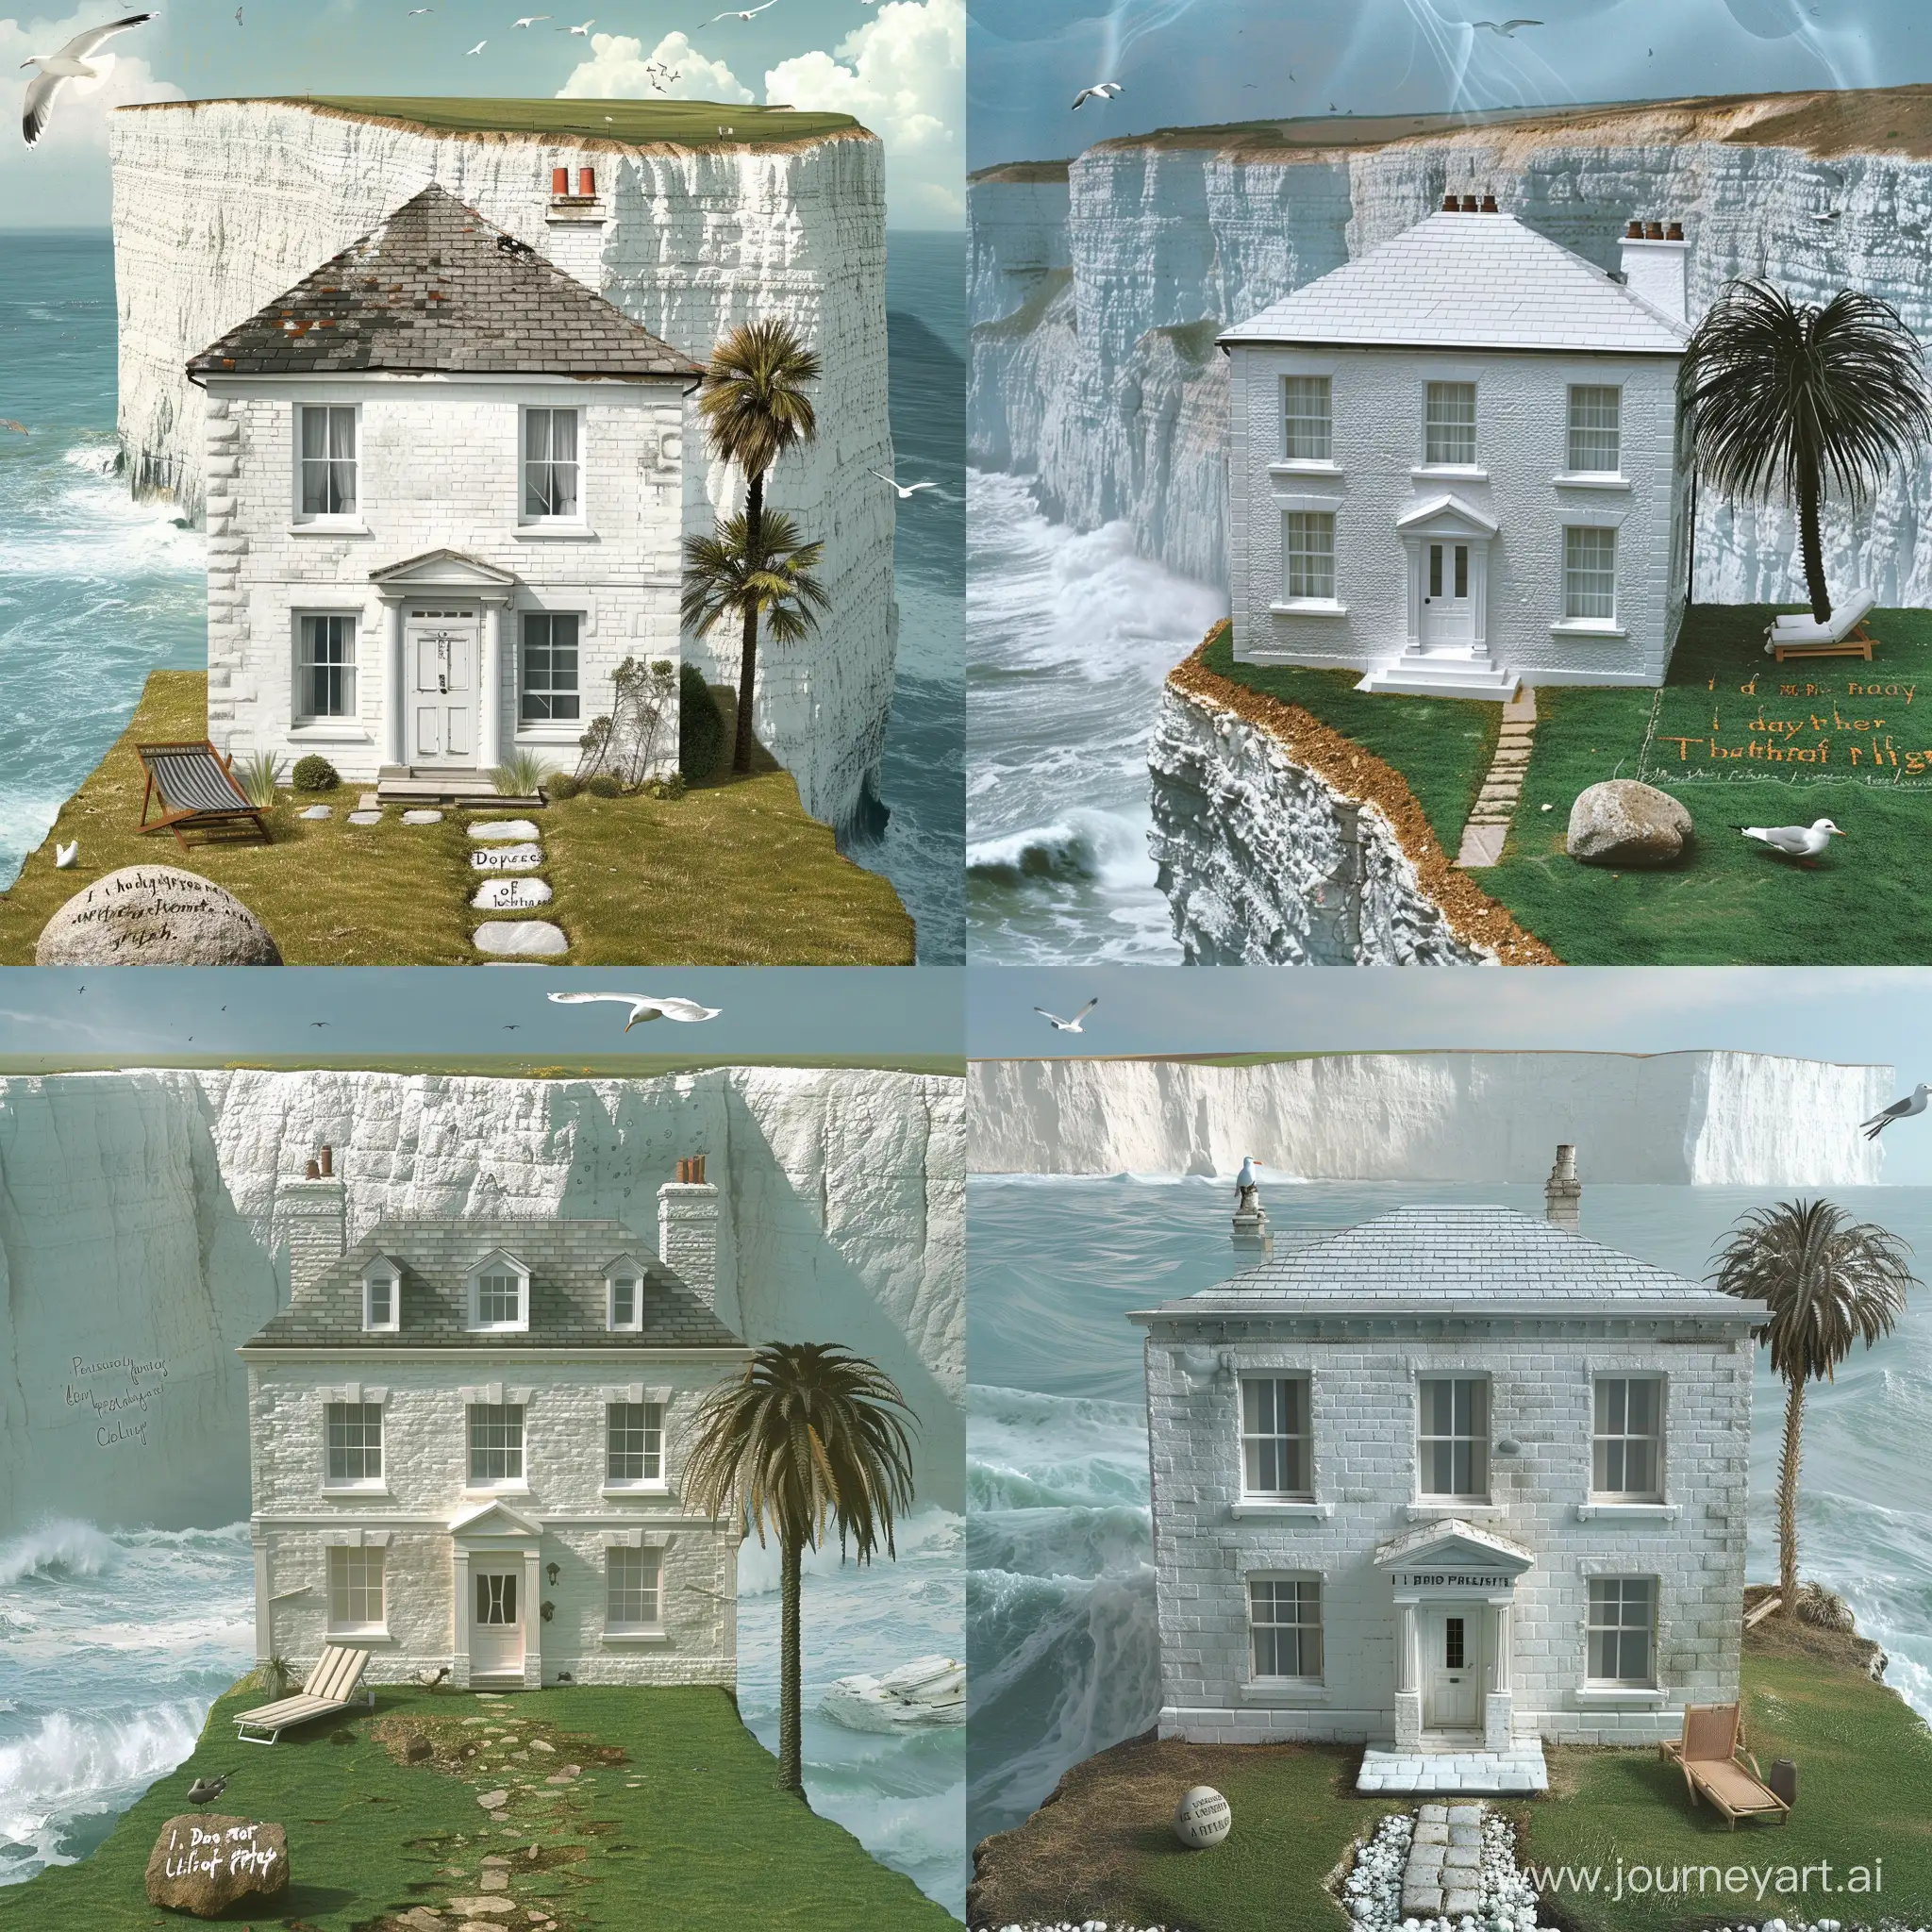 Seaside-Dream-Home-White-House-Overlooking-Cliff-and-Turbulent-Sea